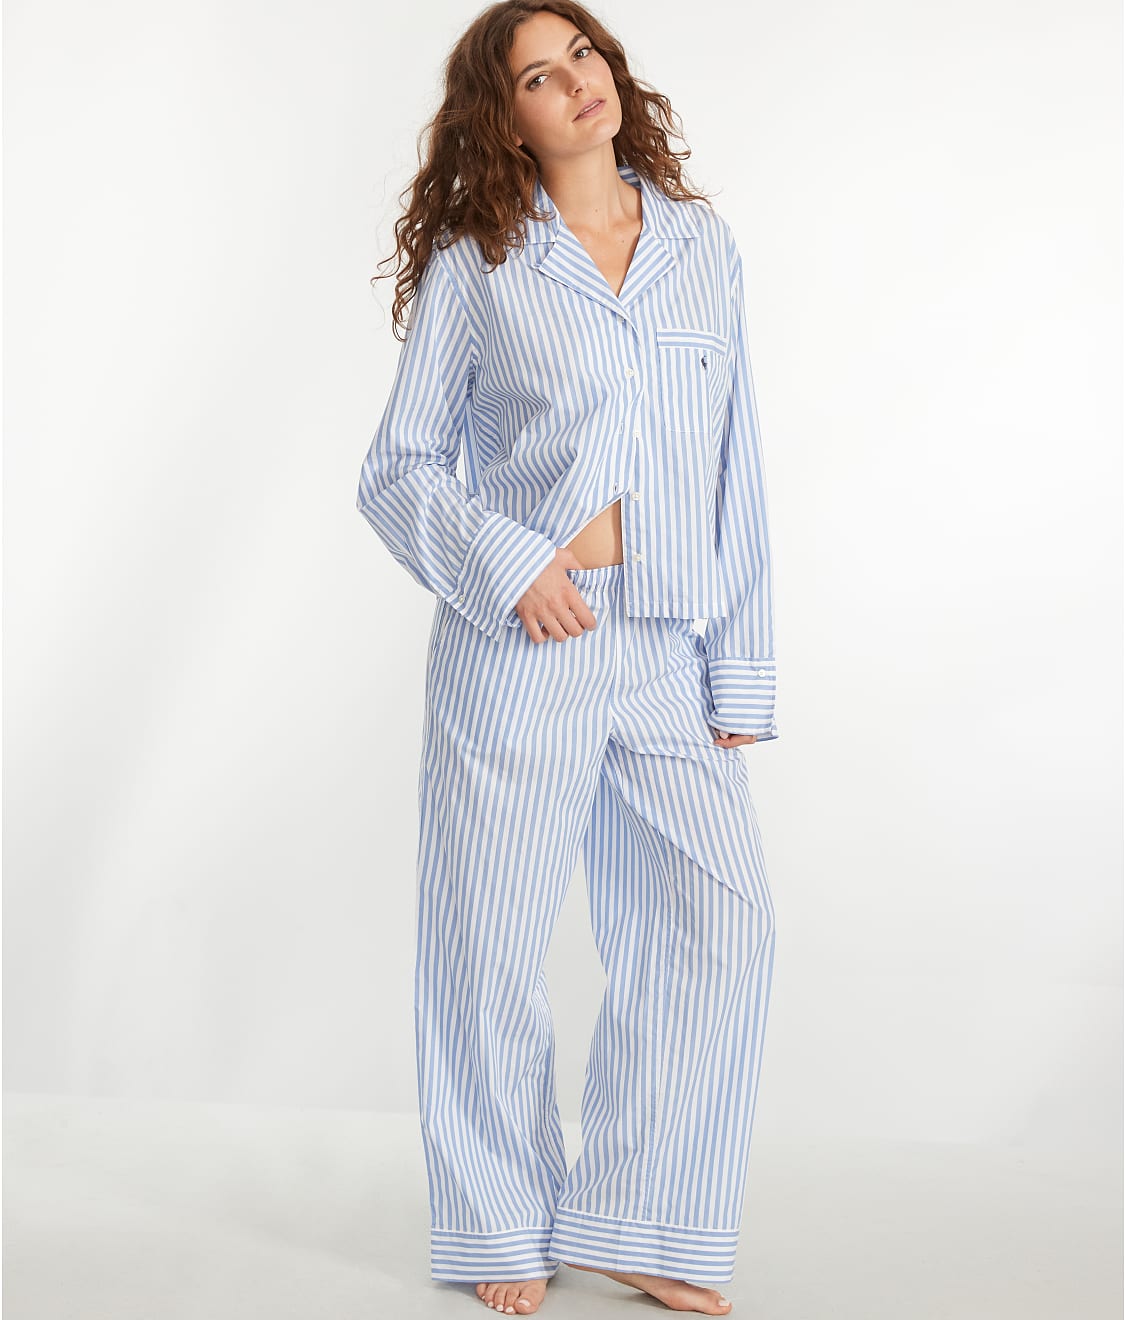 Polo Ralph Lauren Pajamas for Men, Online Sale up to 50% off